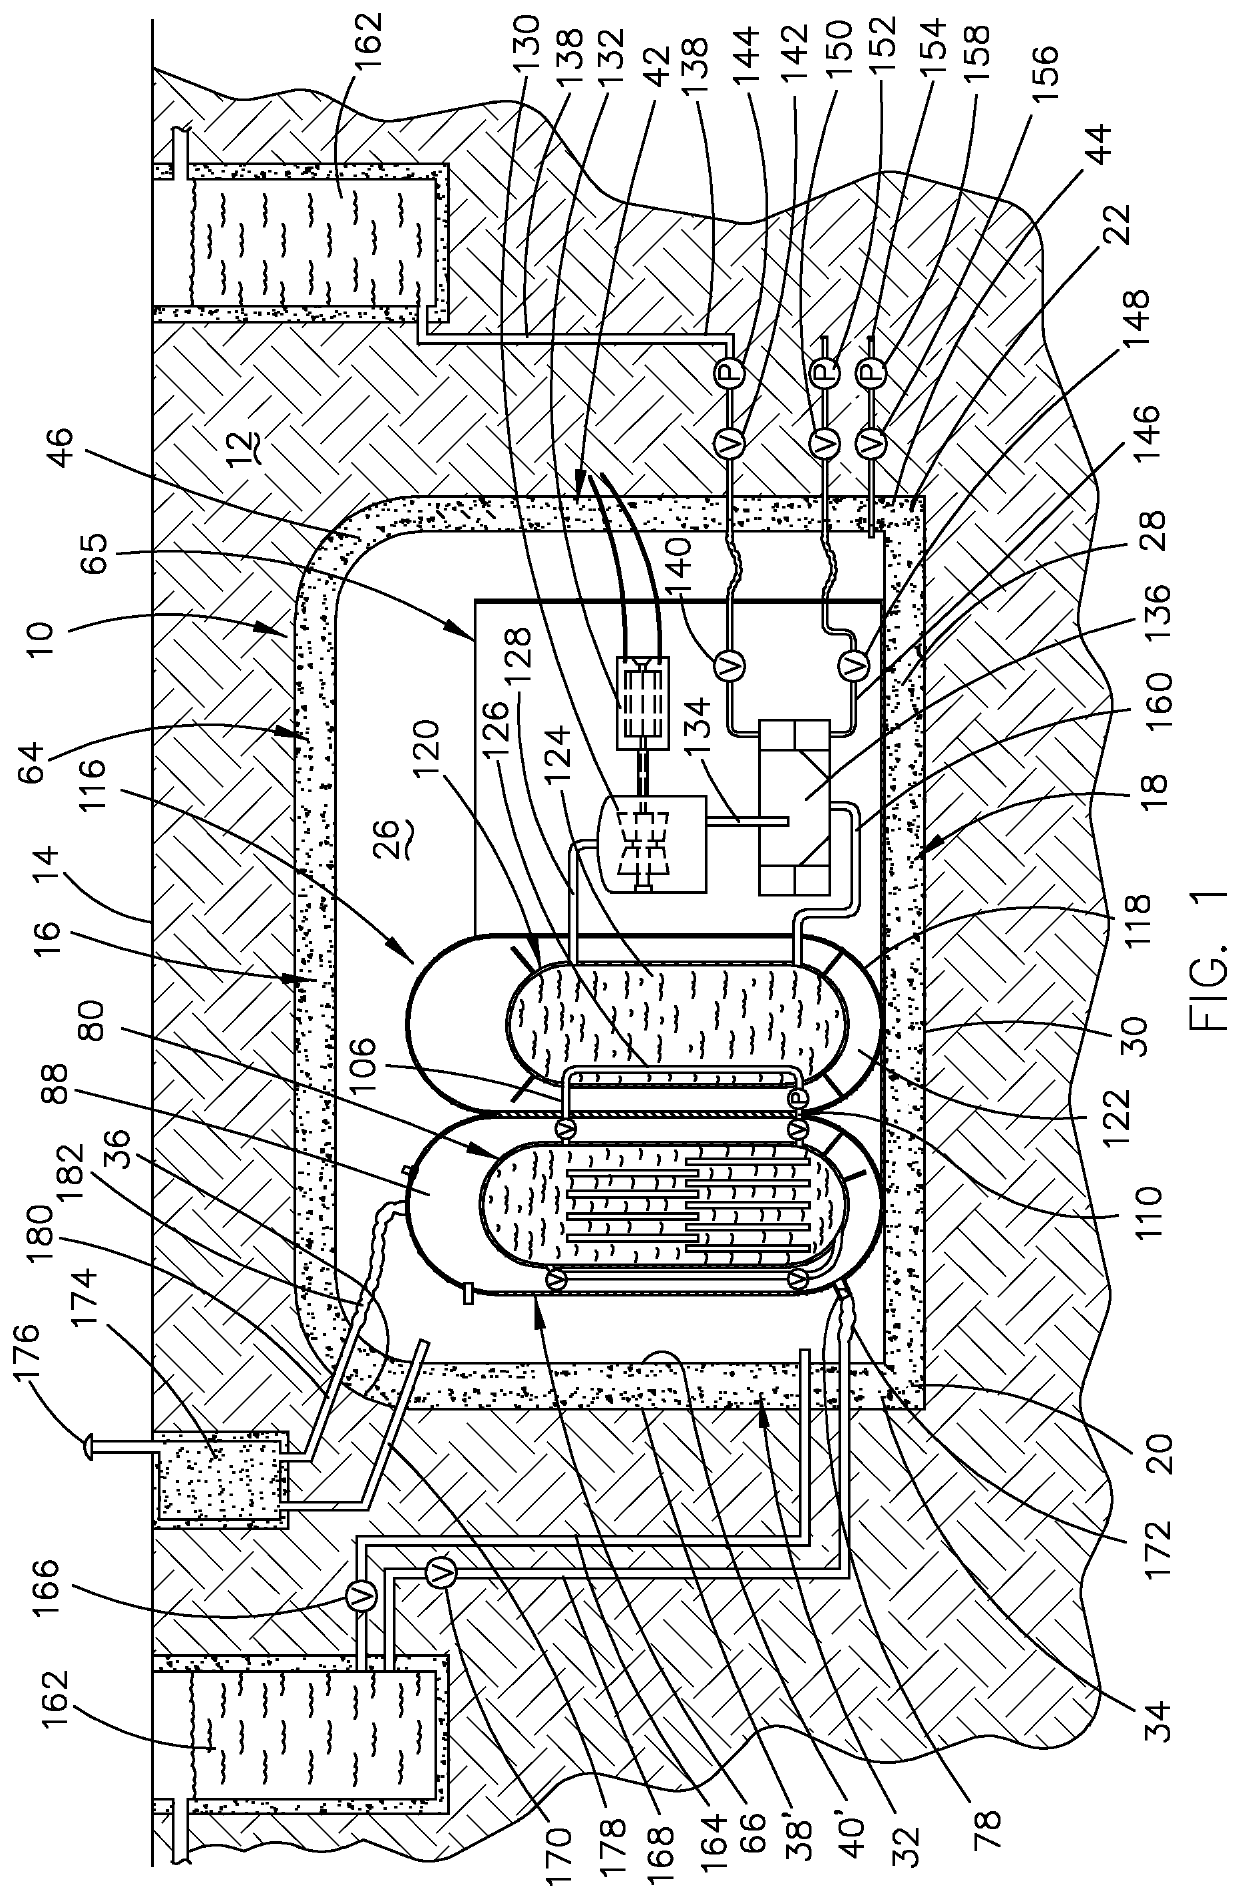 Double containment nuclear power reactor with passive cooling and radiation scrubbing